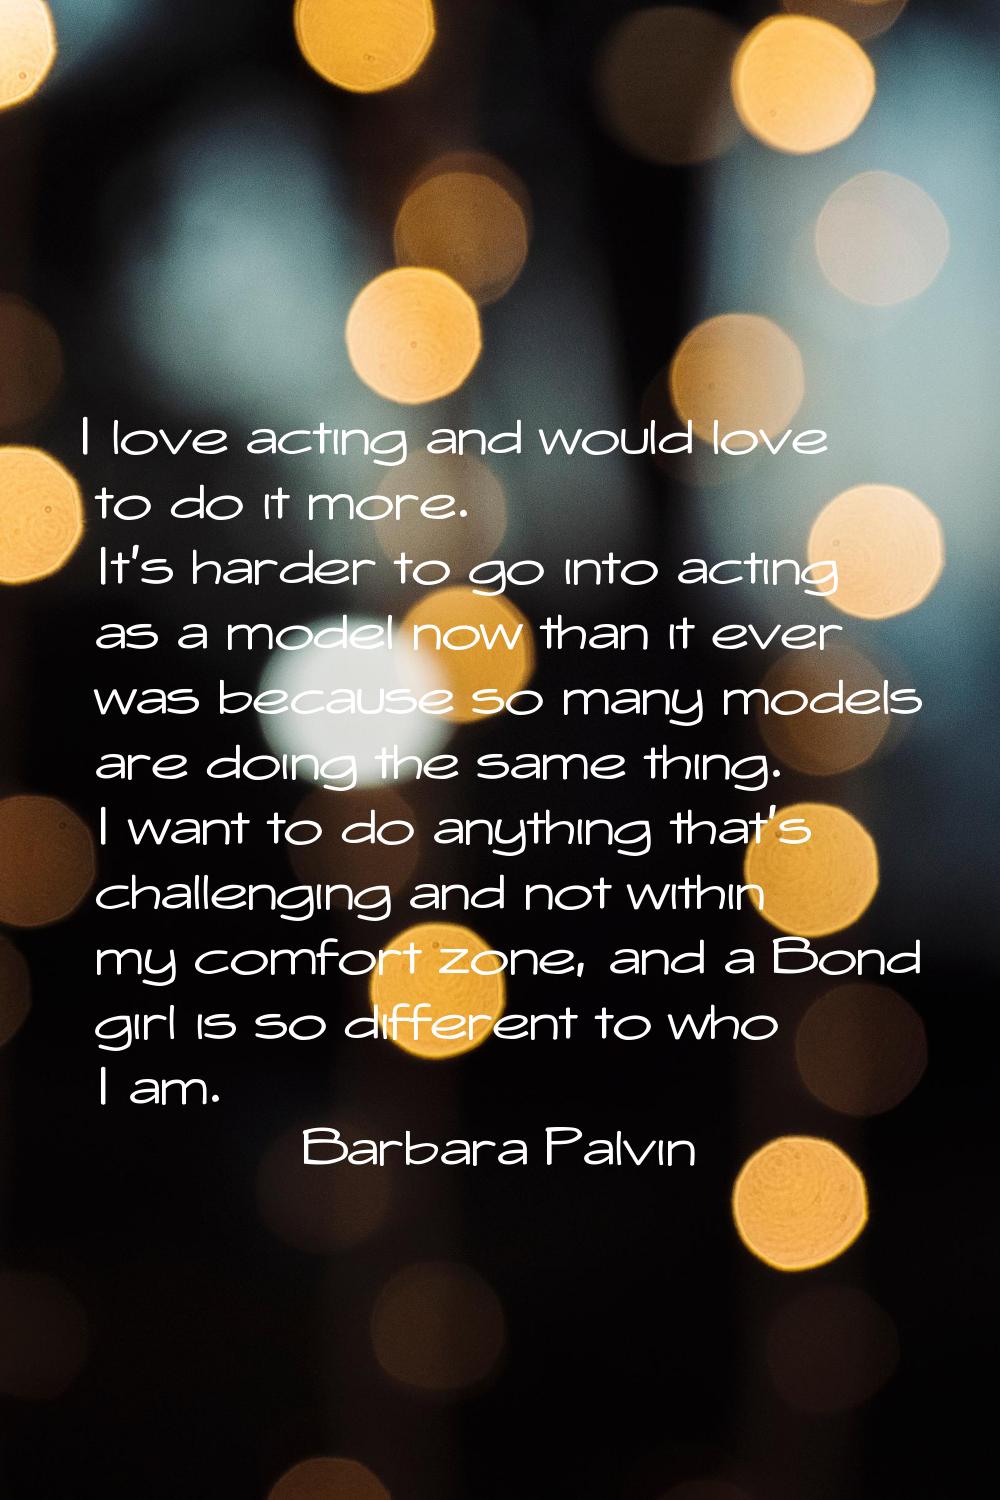 I love acting and would love to do it more. It's harder to go into acting as a model now than it ev